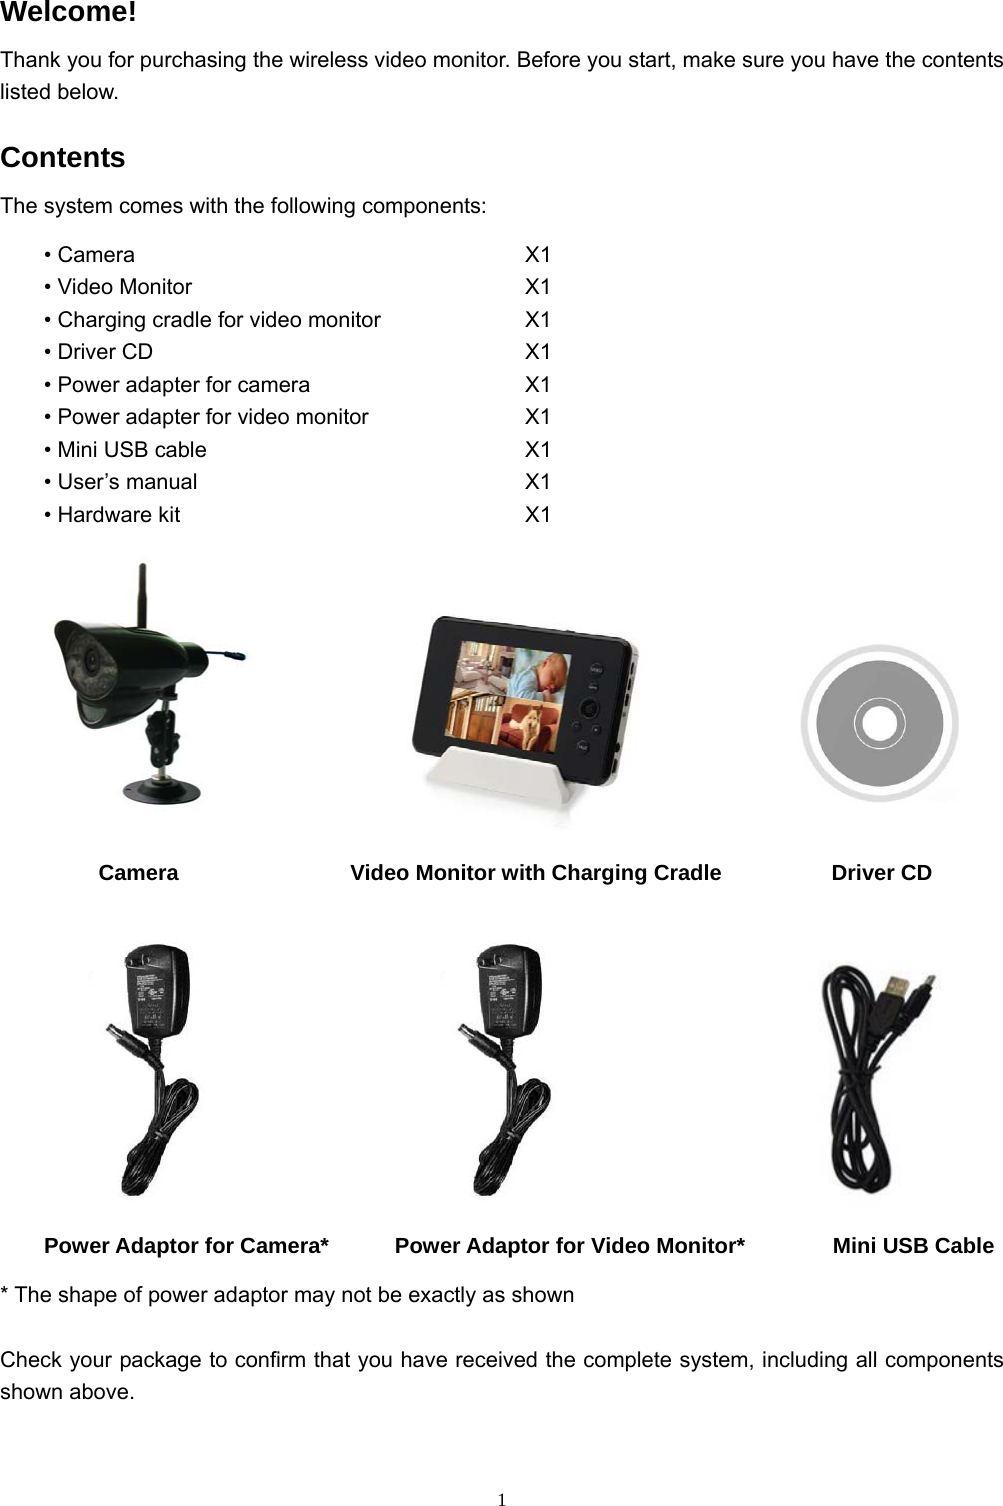  1Welcome! Thank you for purchasing the wireless video monitor. Before you start, make sure you have the contents listed below. Contents The system comes with the following components: • Camera         X1 • Video Monitor        X1 • Charging cradle for video monitor        X1 • Driver CD         X1 • Power adapter for camera          X1 • Power adapter for video monitor        X1 • Mini USB cable        X1 • User’s manual        X1 • Hardware kit        X1                                   Camera          Video Monitor with Charging Cradle          Driver CD                        Power Adaptor for Camera*      Power Adaptor for Video Monitor*        Mini USB Cable * The shape of power adaptor may not be exactly as shown Check your package to confirm that you have received the complete system, including all components shown above. 